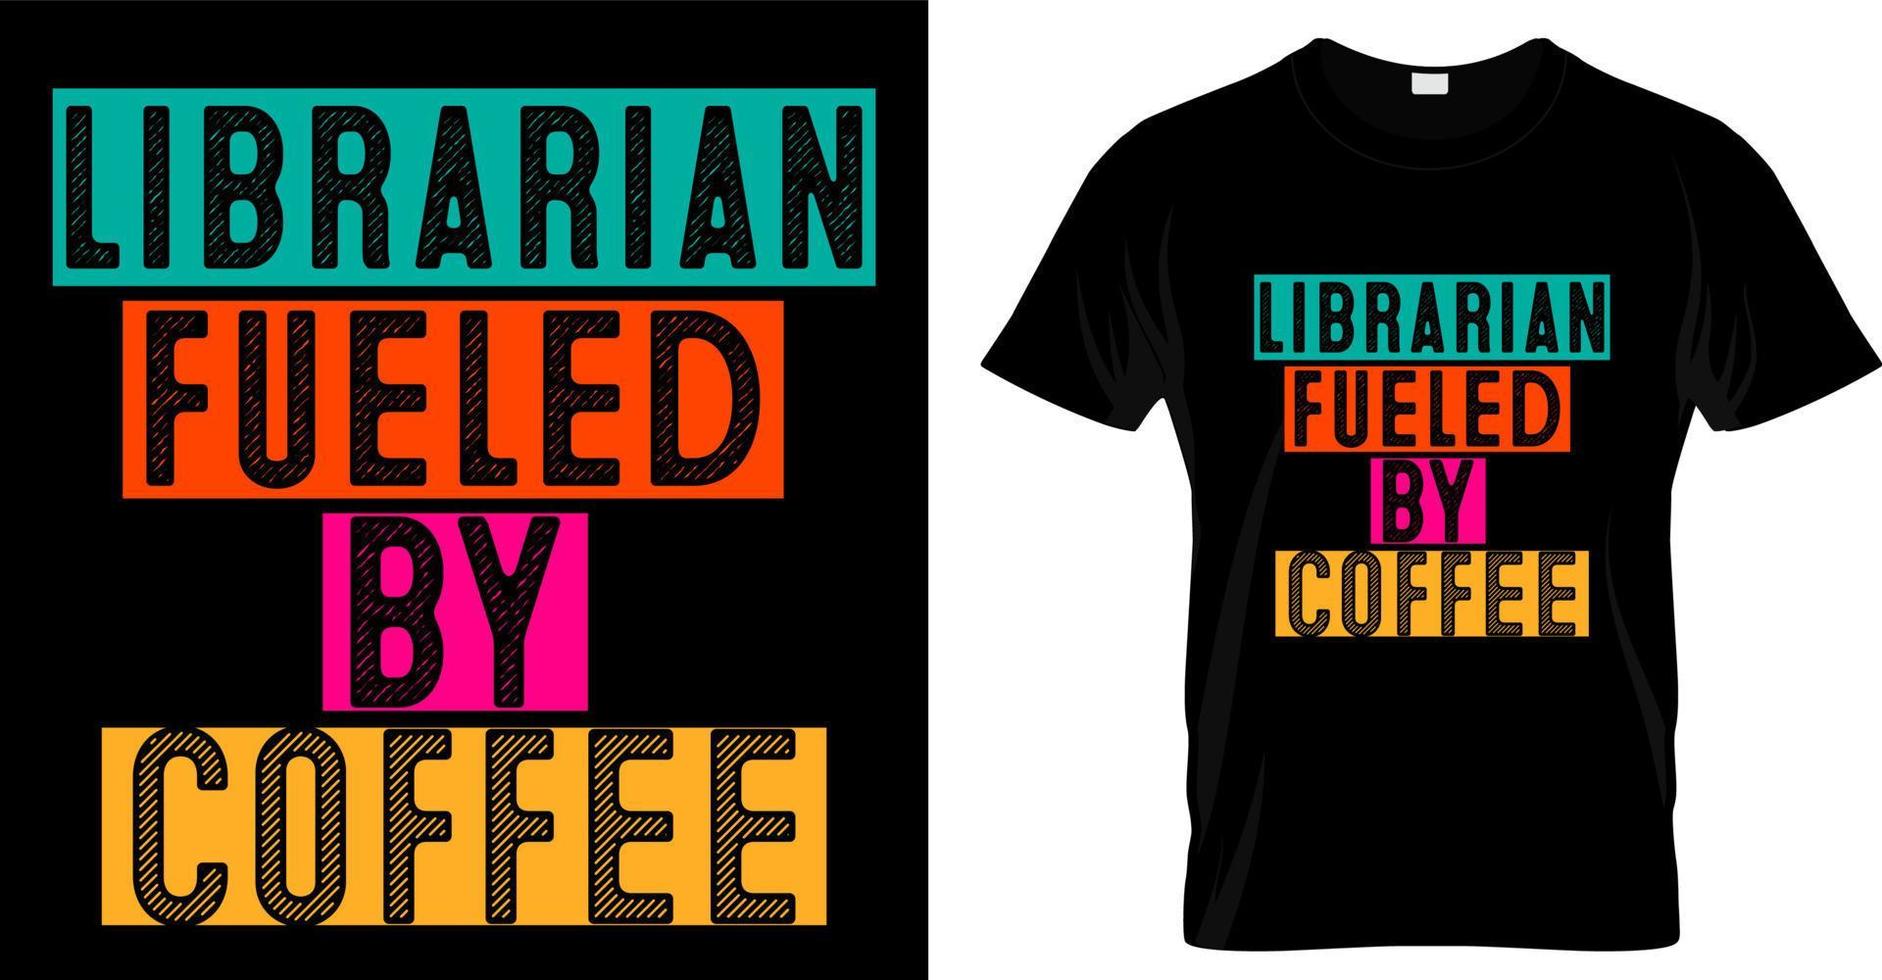 Librarian fueled by coffee. Motivation hand drawn lettering quote about books and reading. Love reading book phrases vintage vector illustration. Perfect for t shirt, print, posters.